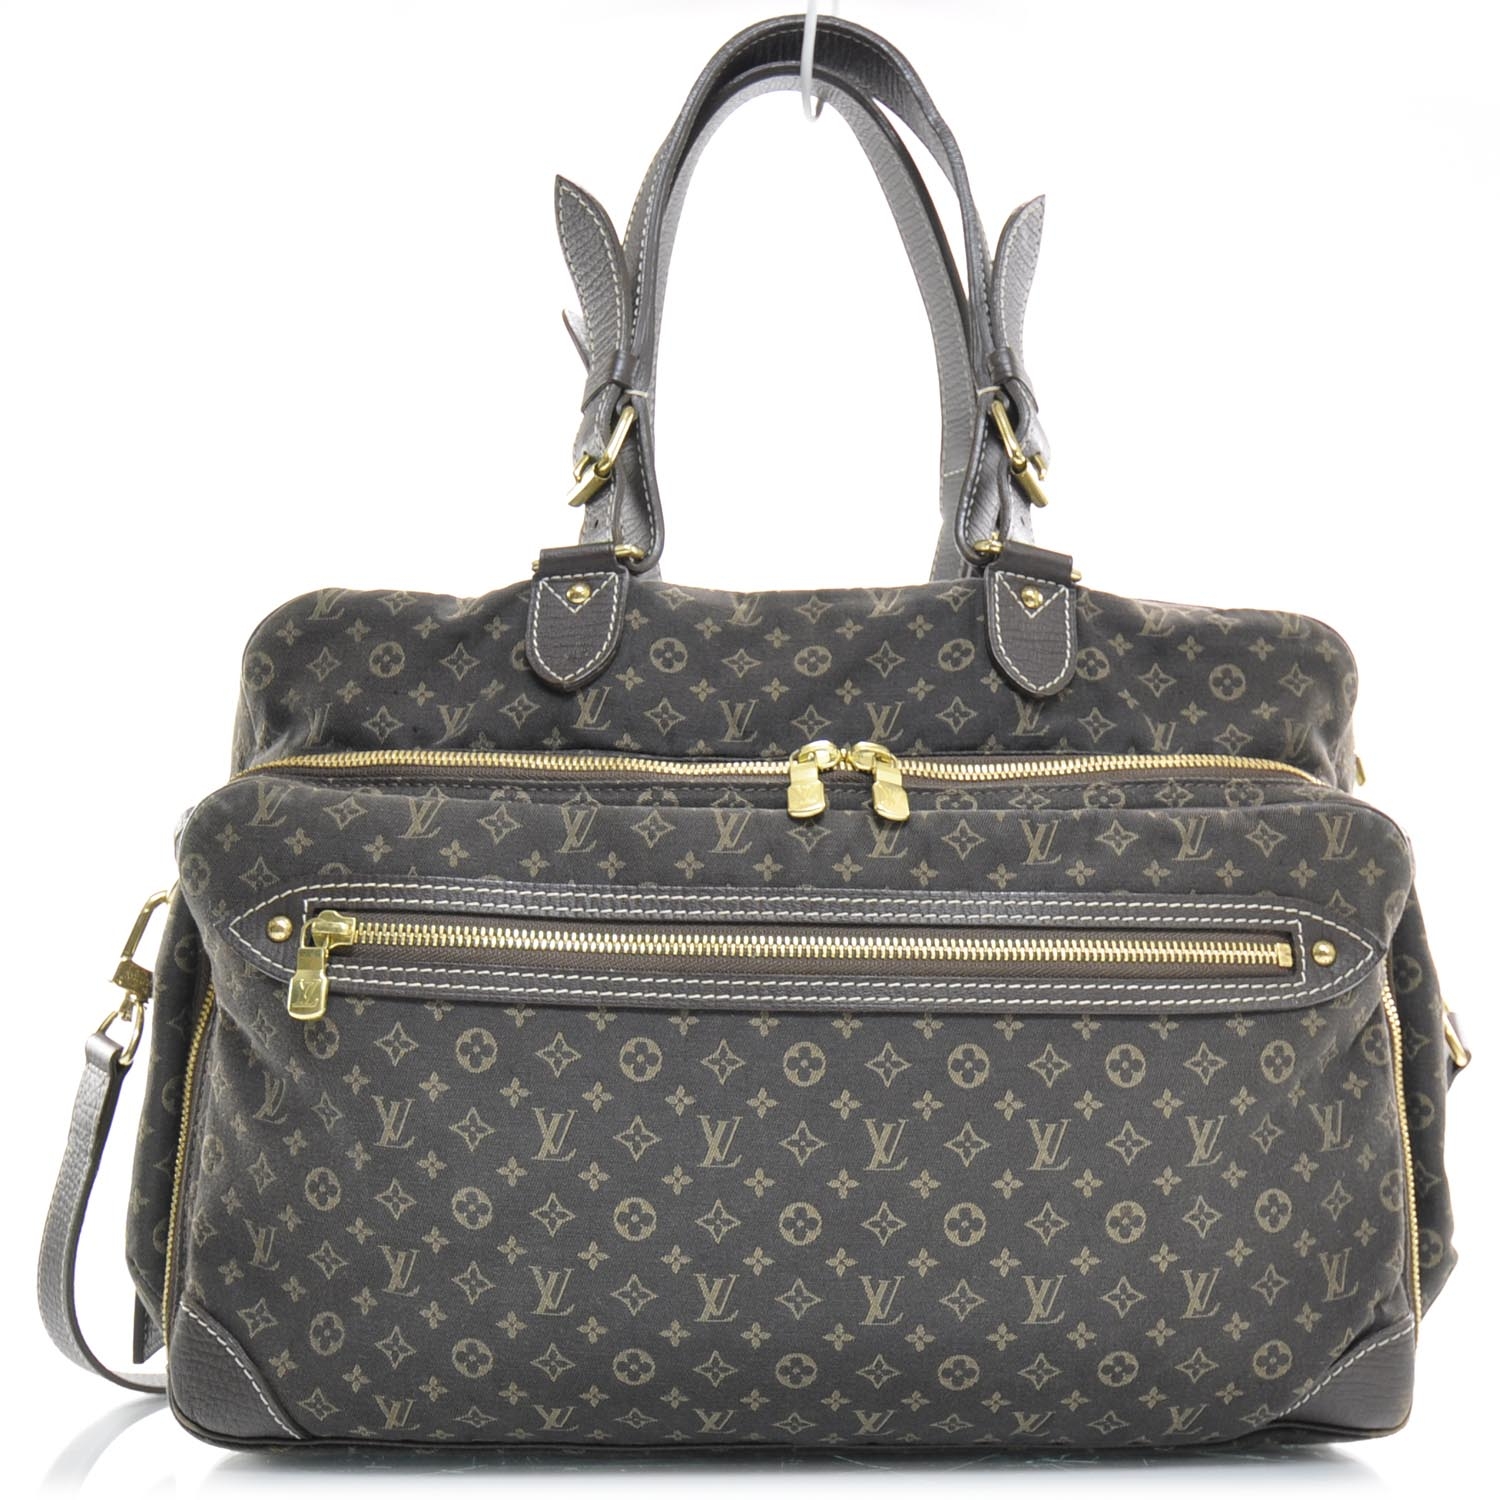 The Yummy Mummy Diary: Researching Diaper- Bags...